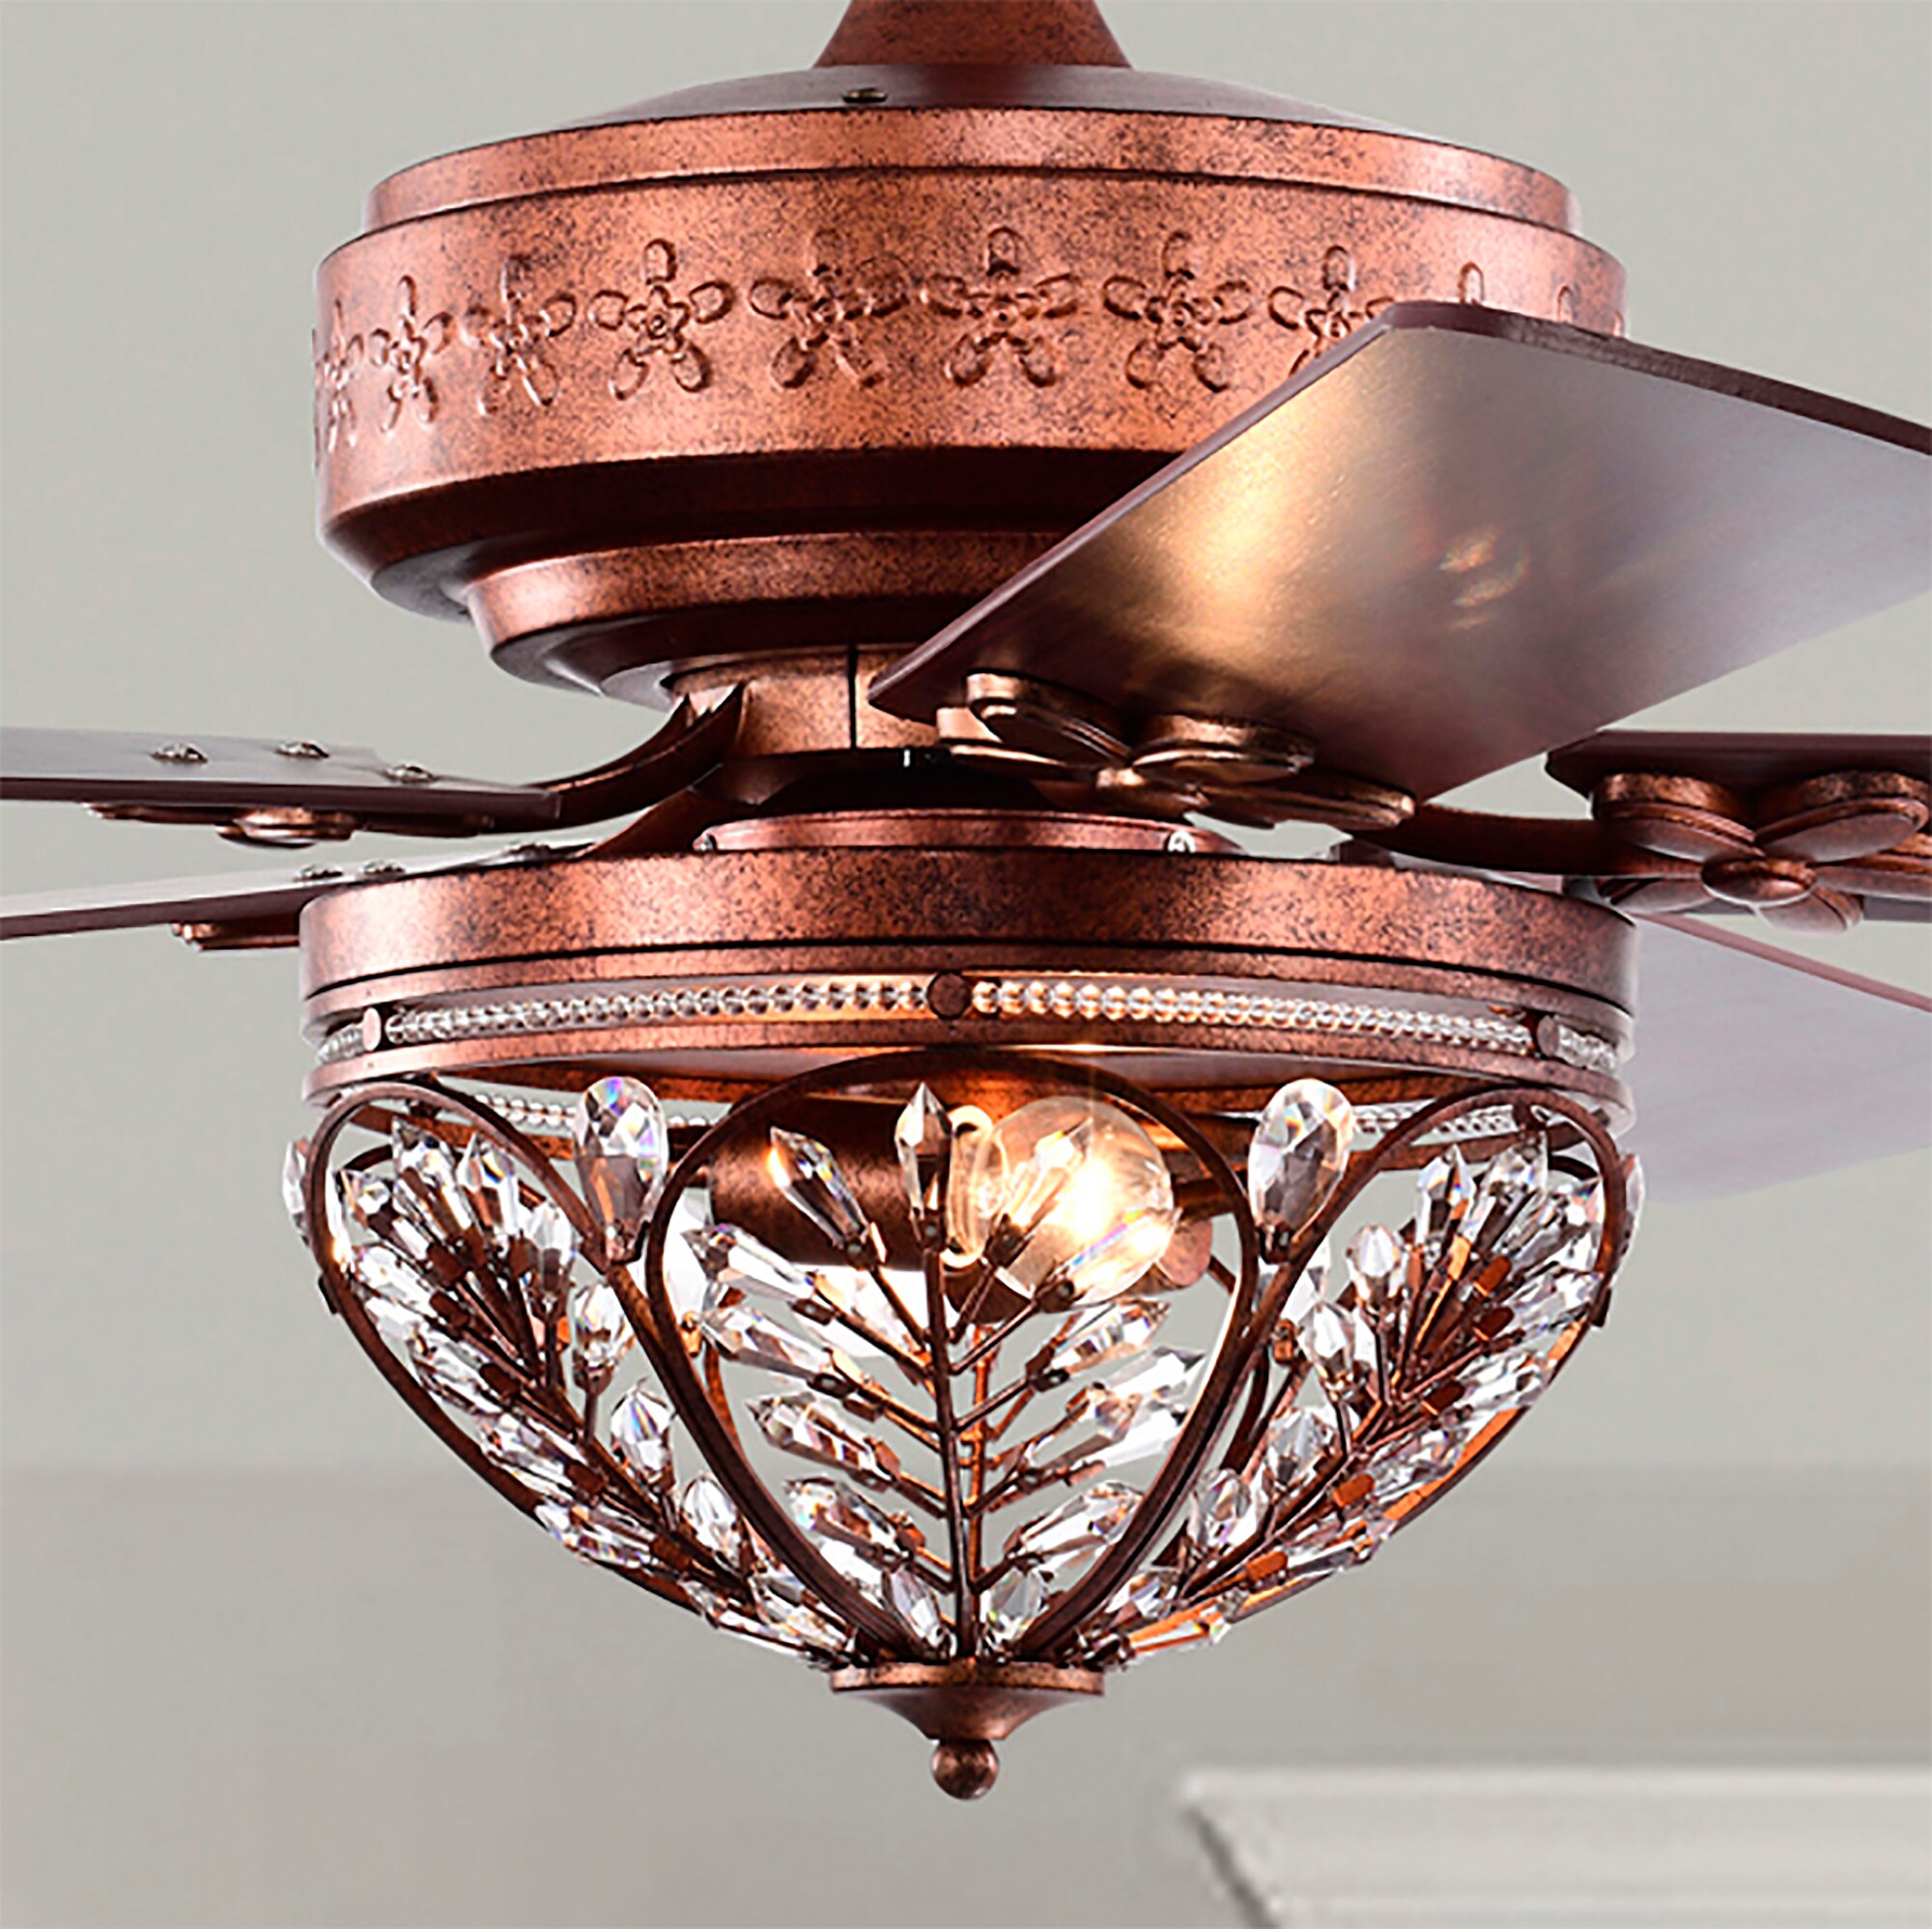 Home Accessories Inc 52-in Antique Copper Indoor Ceiling Fan with 